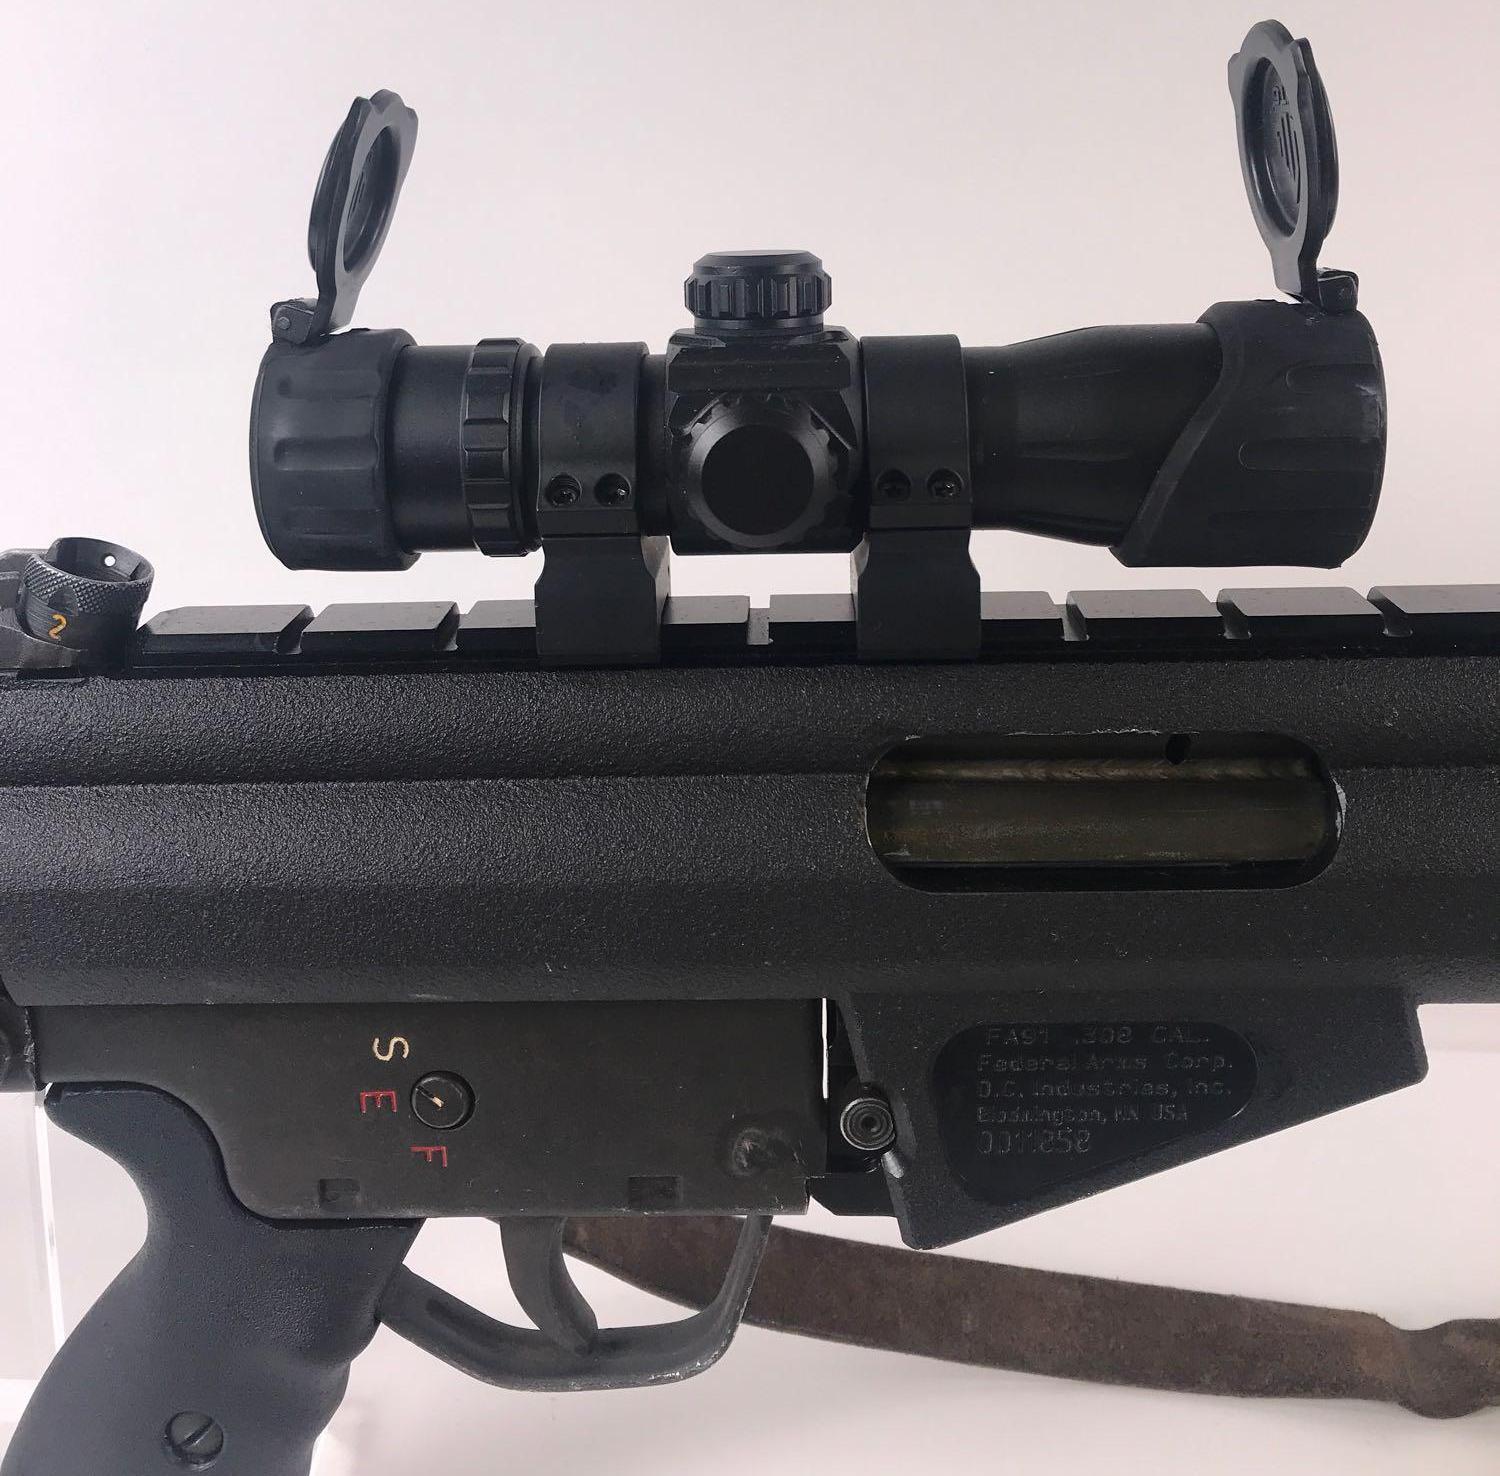 Federal Arms Corp Model FA91 Rifle with Scope